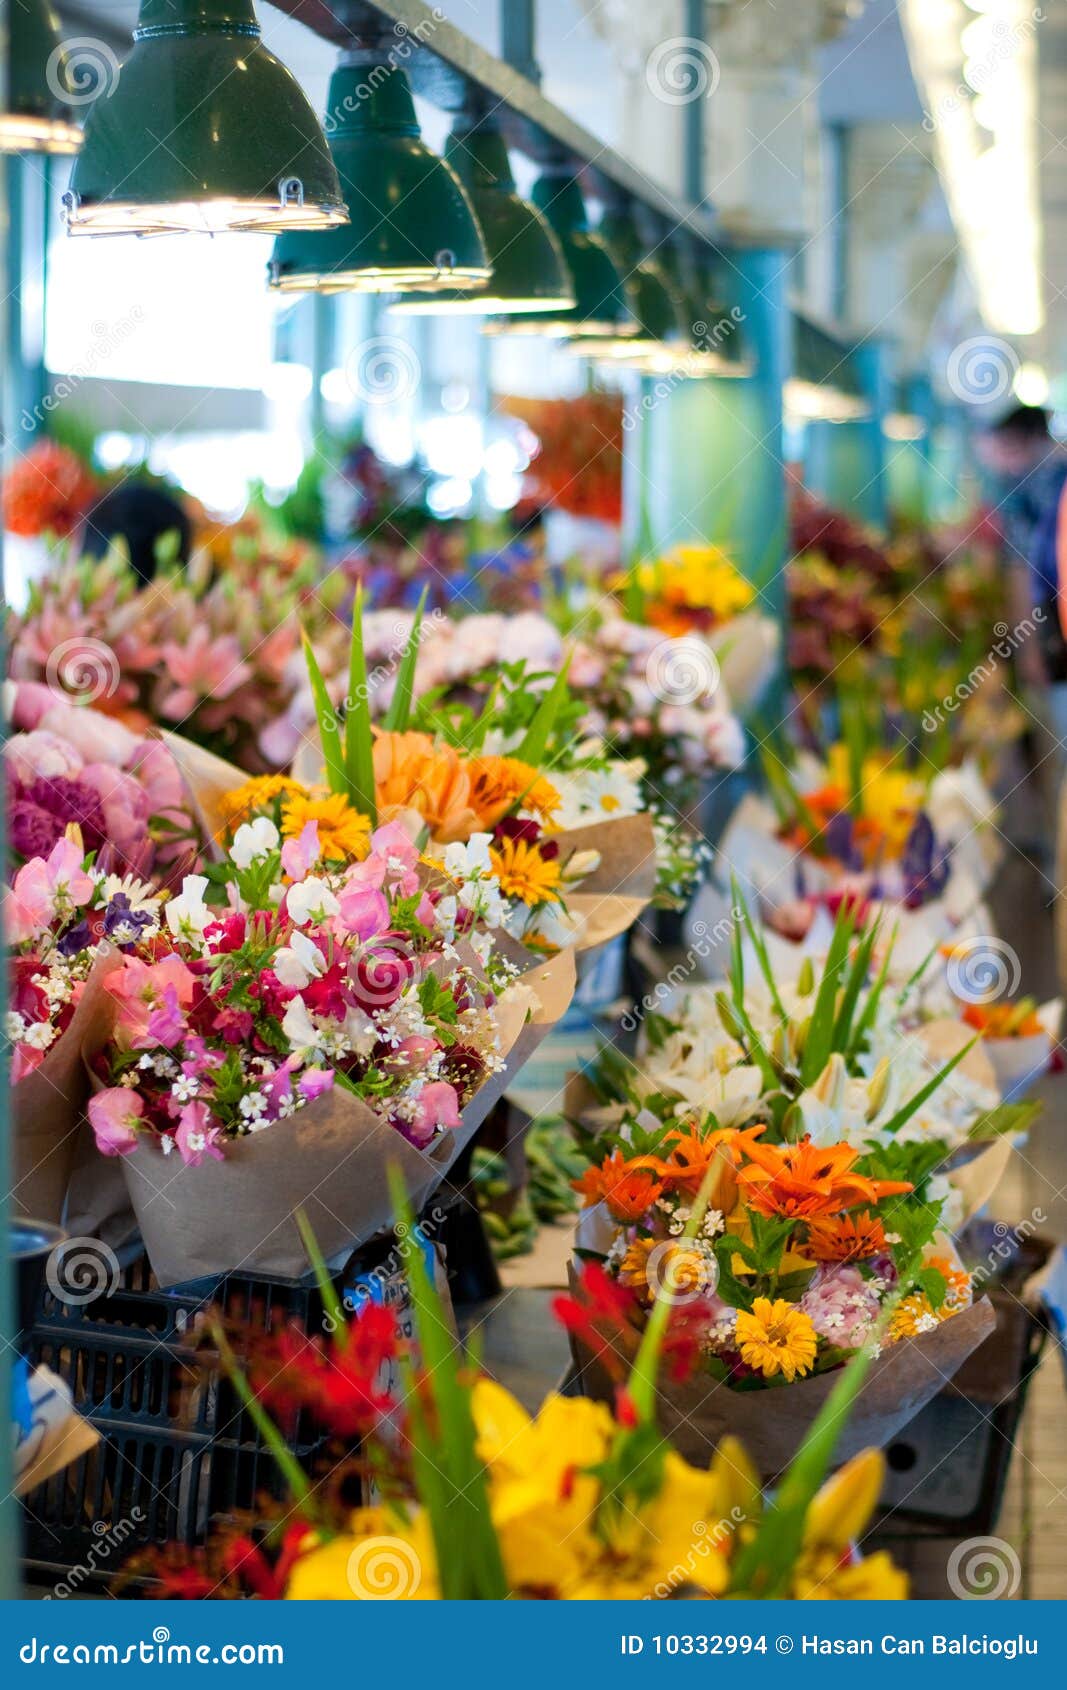 182 Pike Place Flowers Seattle Photos Free Royalty Free Stock Photos From Dreamstime